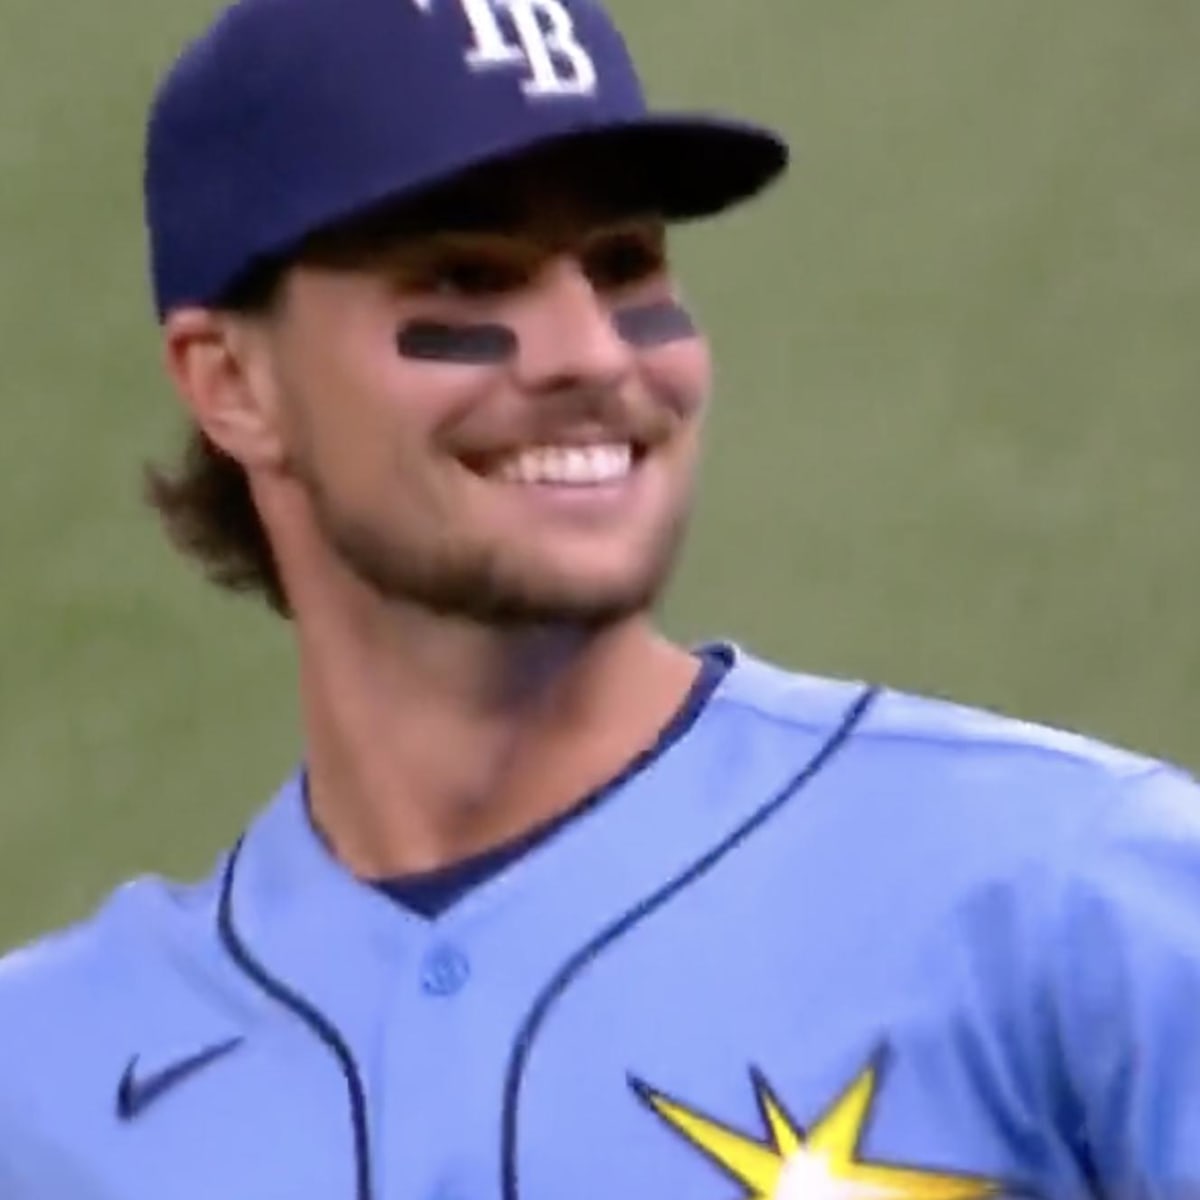 VIDEO: At Least Tampa Bay Rays Outfielder Josh Lowe Can Laugh At